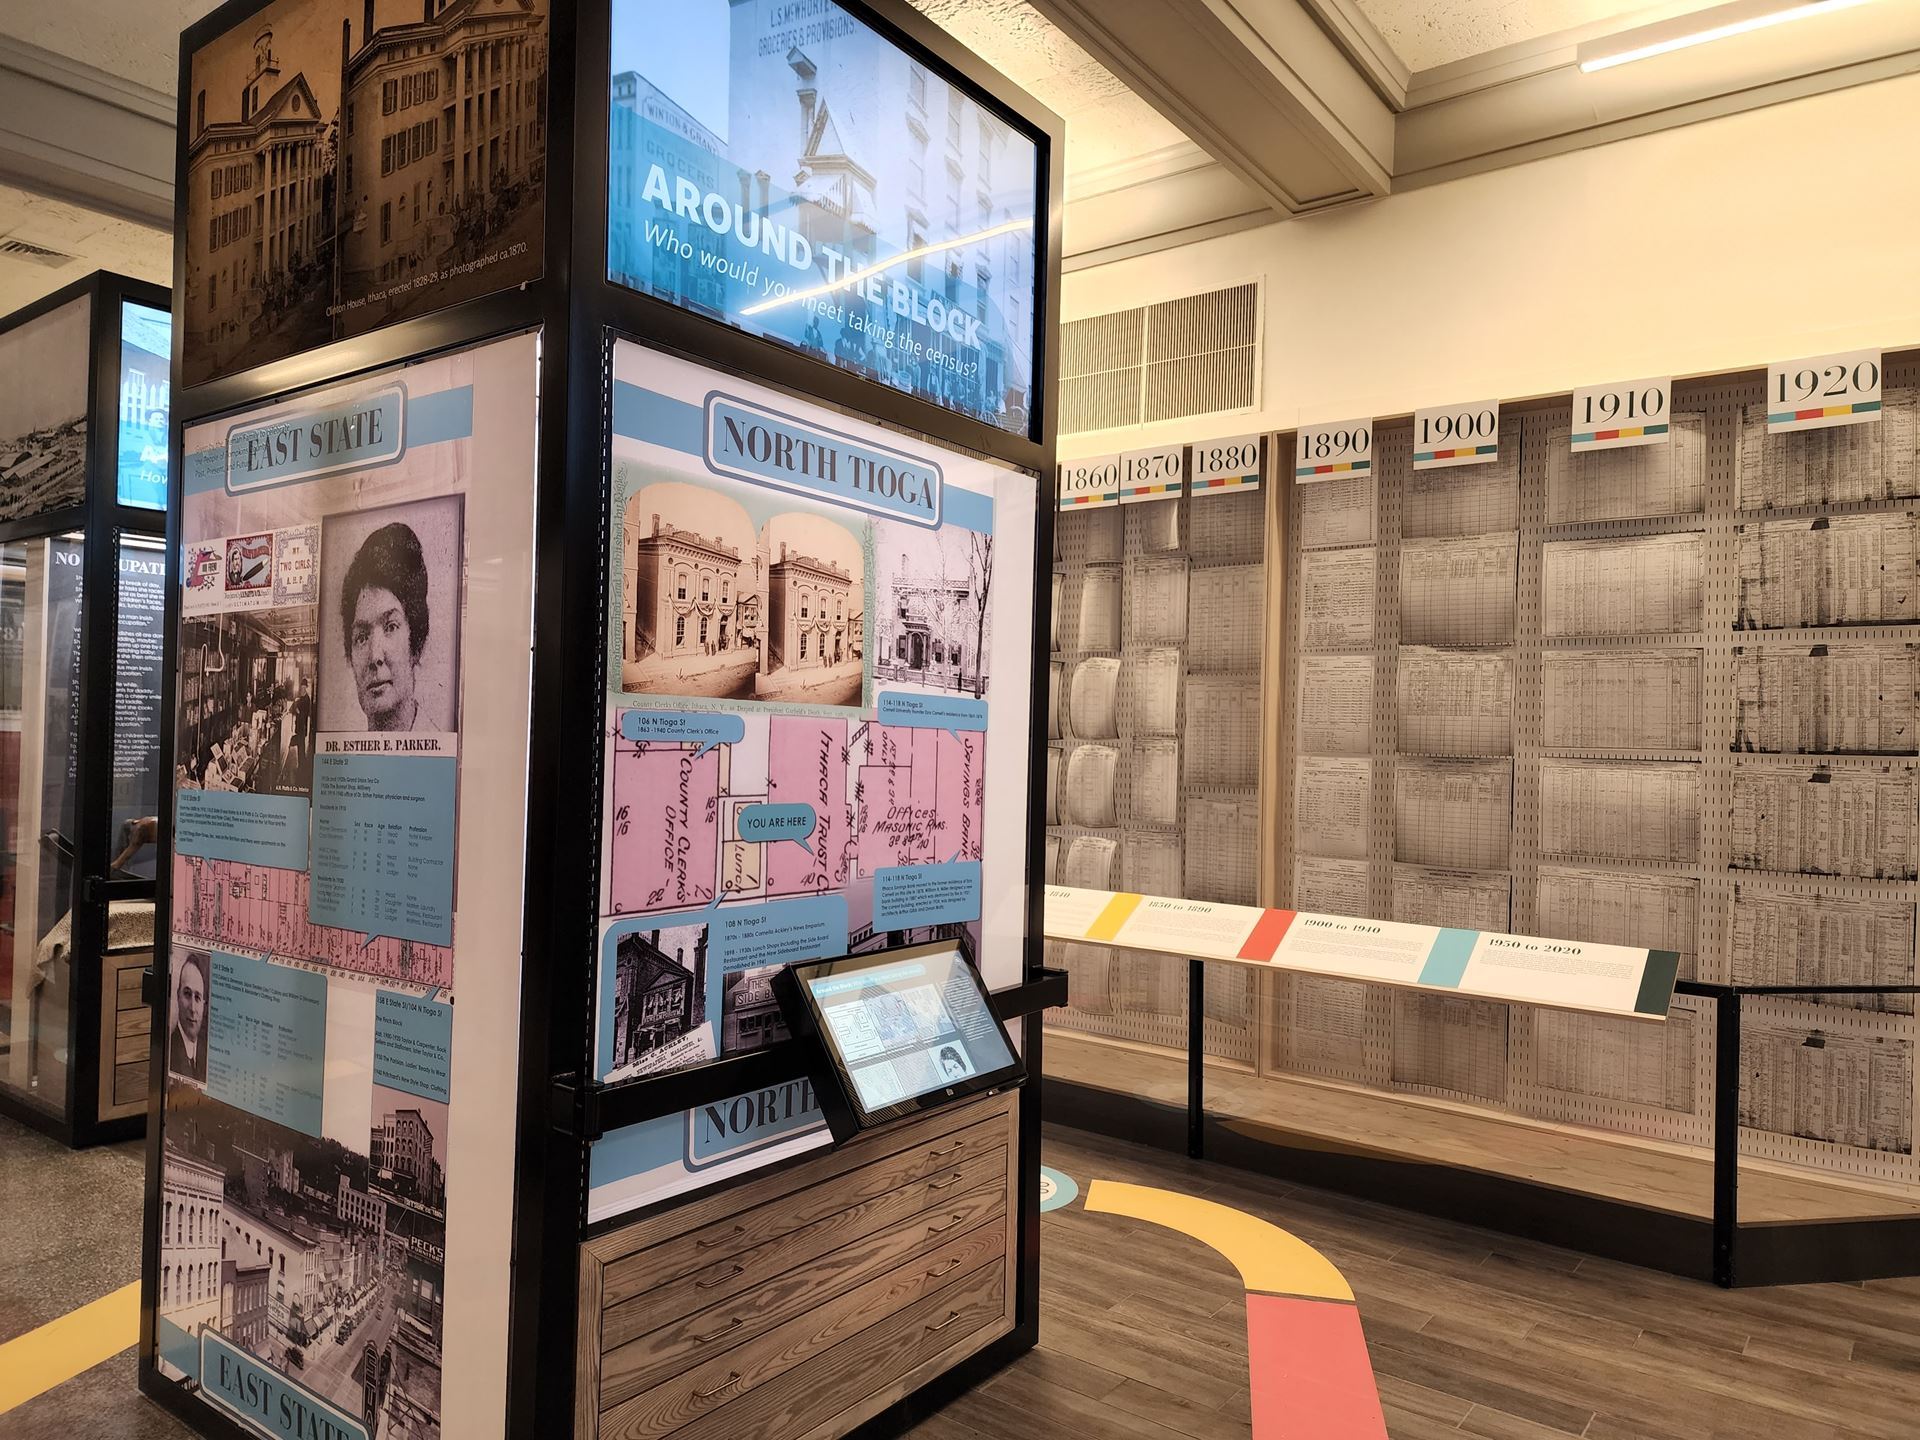 A small rectangular image of the census exhibit.